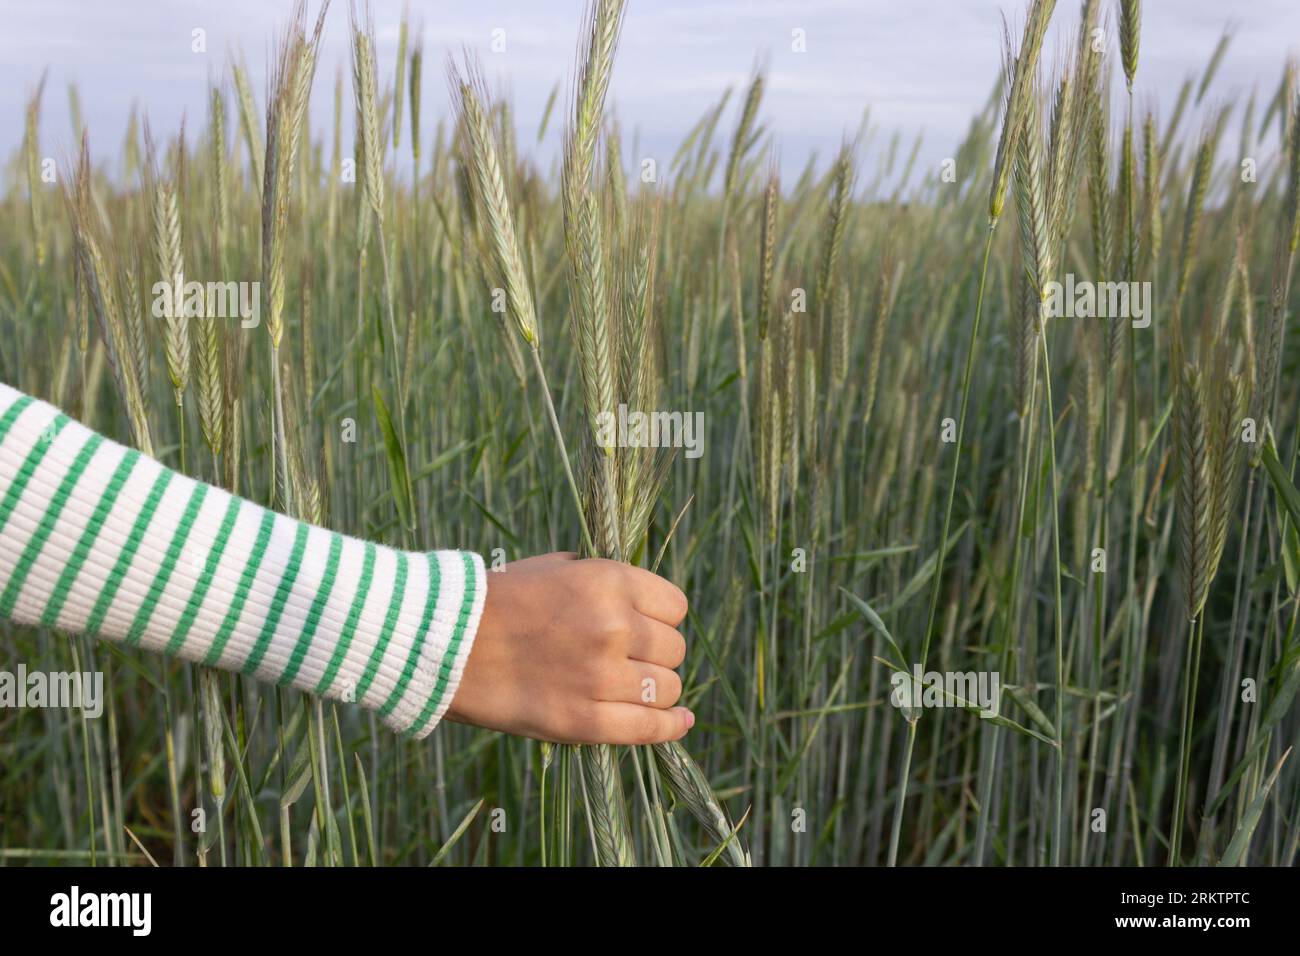 A child in a striped sweatshirt holds ears of corn against the background of a grain field. Stock Photo